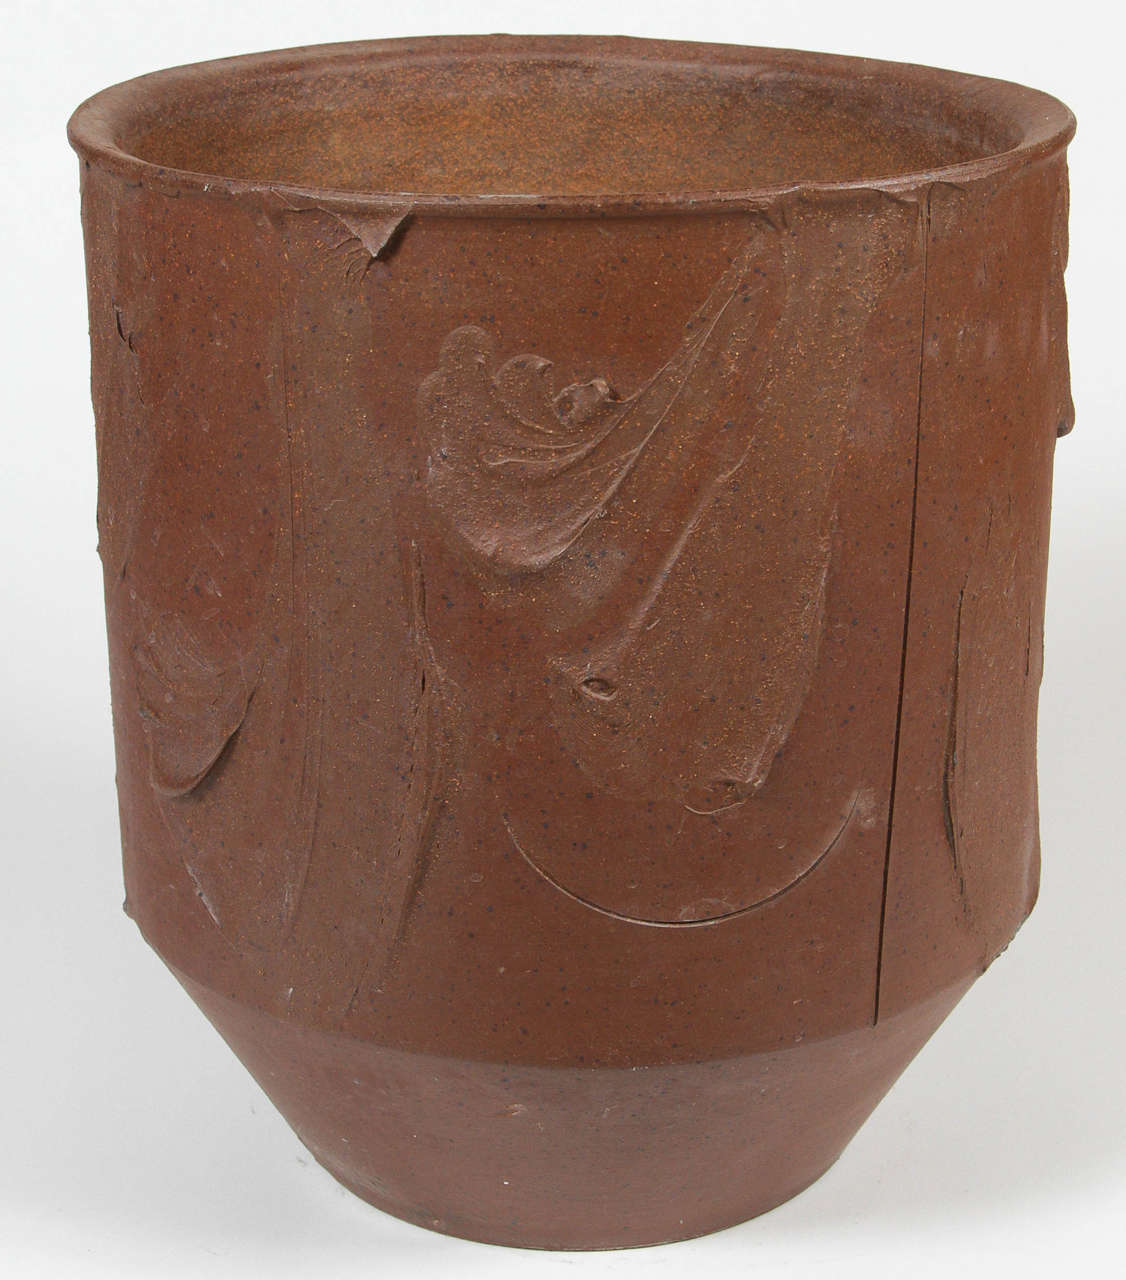 5048 planter with expressive texture by David Cressey for Architectural Pottery Pro Artisan collection, circa 1970.